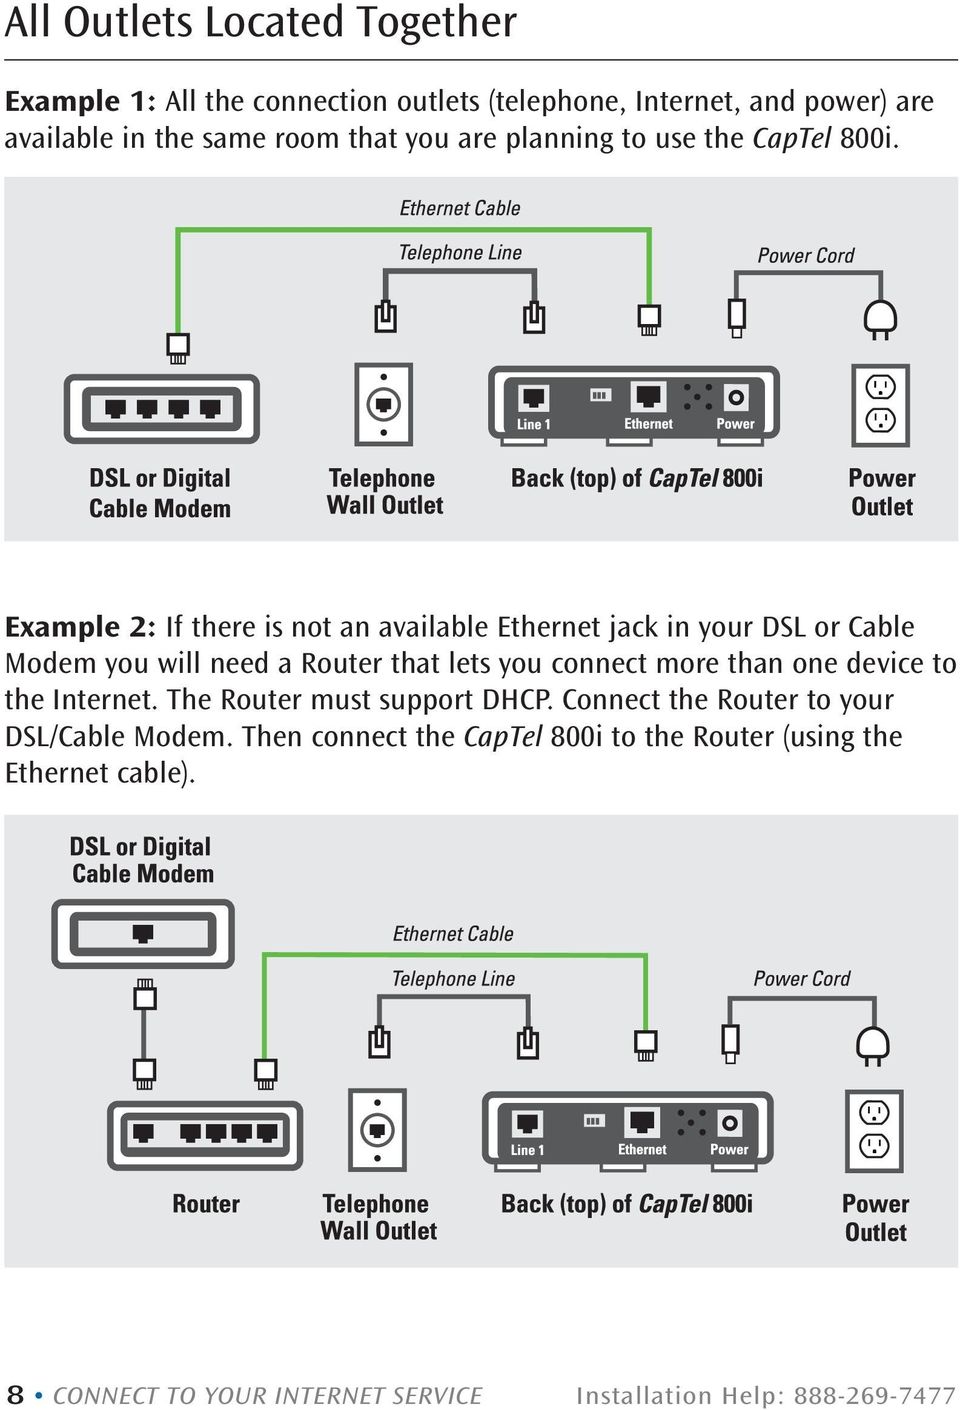 Example 2: If there is not an available Ethernet jack in your DSL or Cable Modem you will need a Router that lets you connect more than